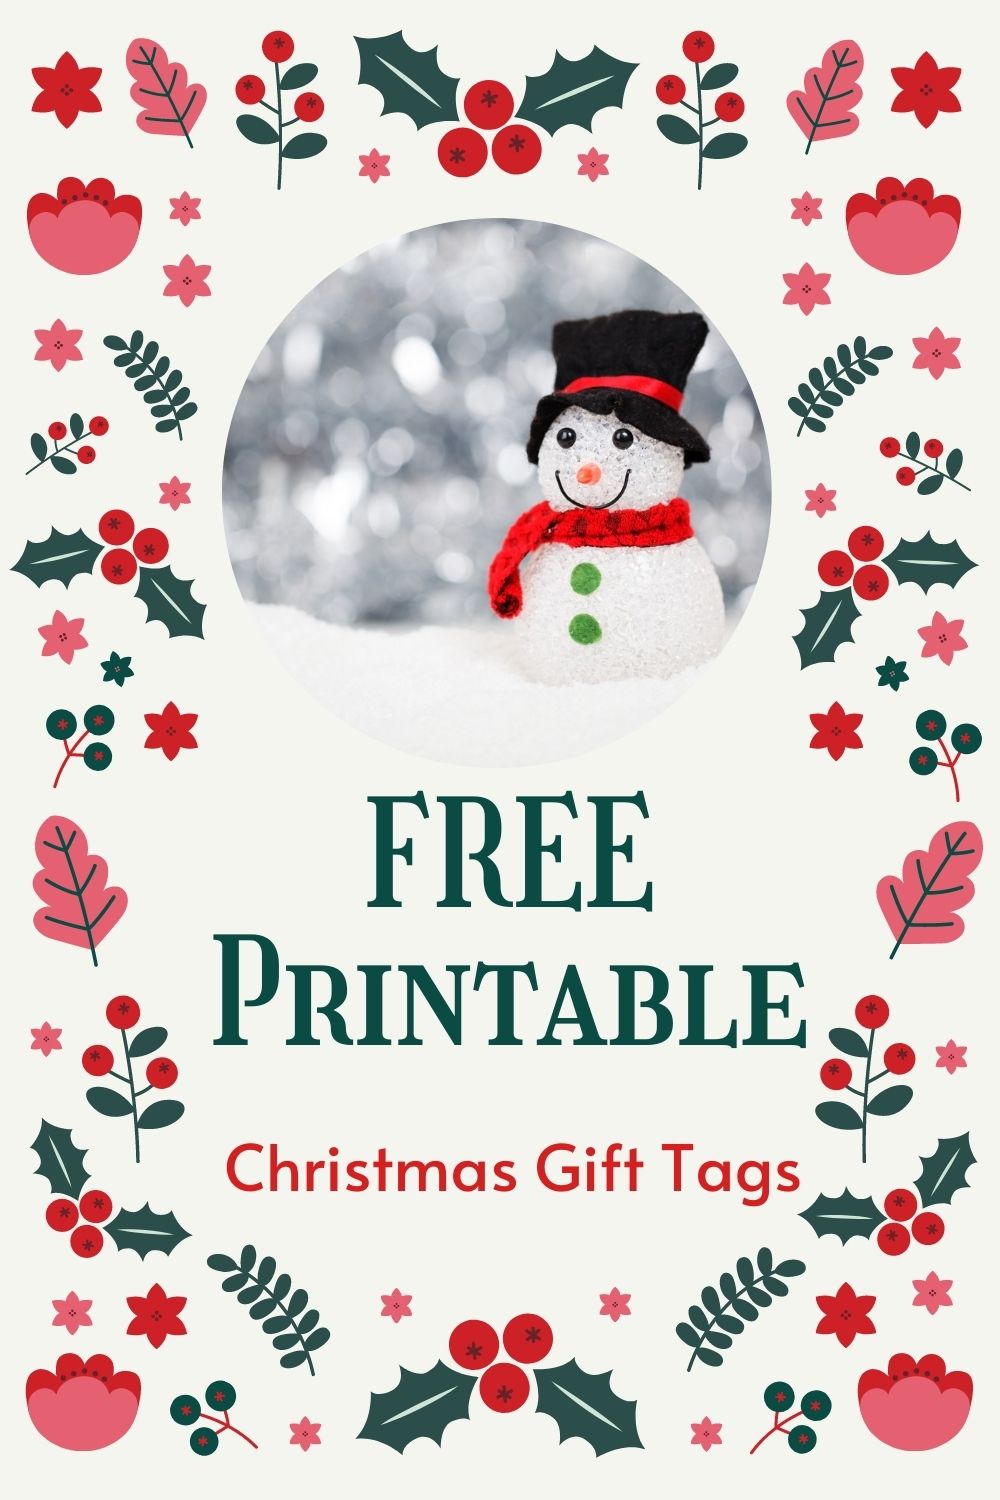 https://www.budgetearth.com/wp-content/uploads/2013/12/Free-Printable-Christmas-Gift-Tags.jpg